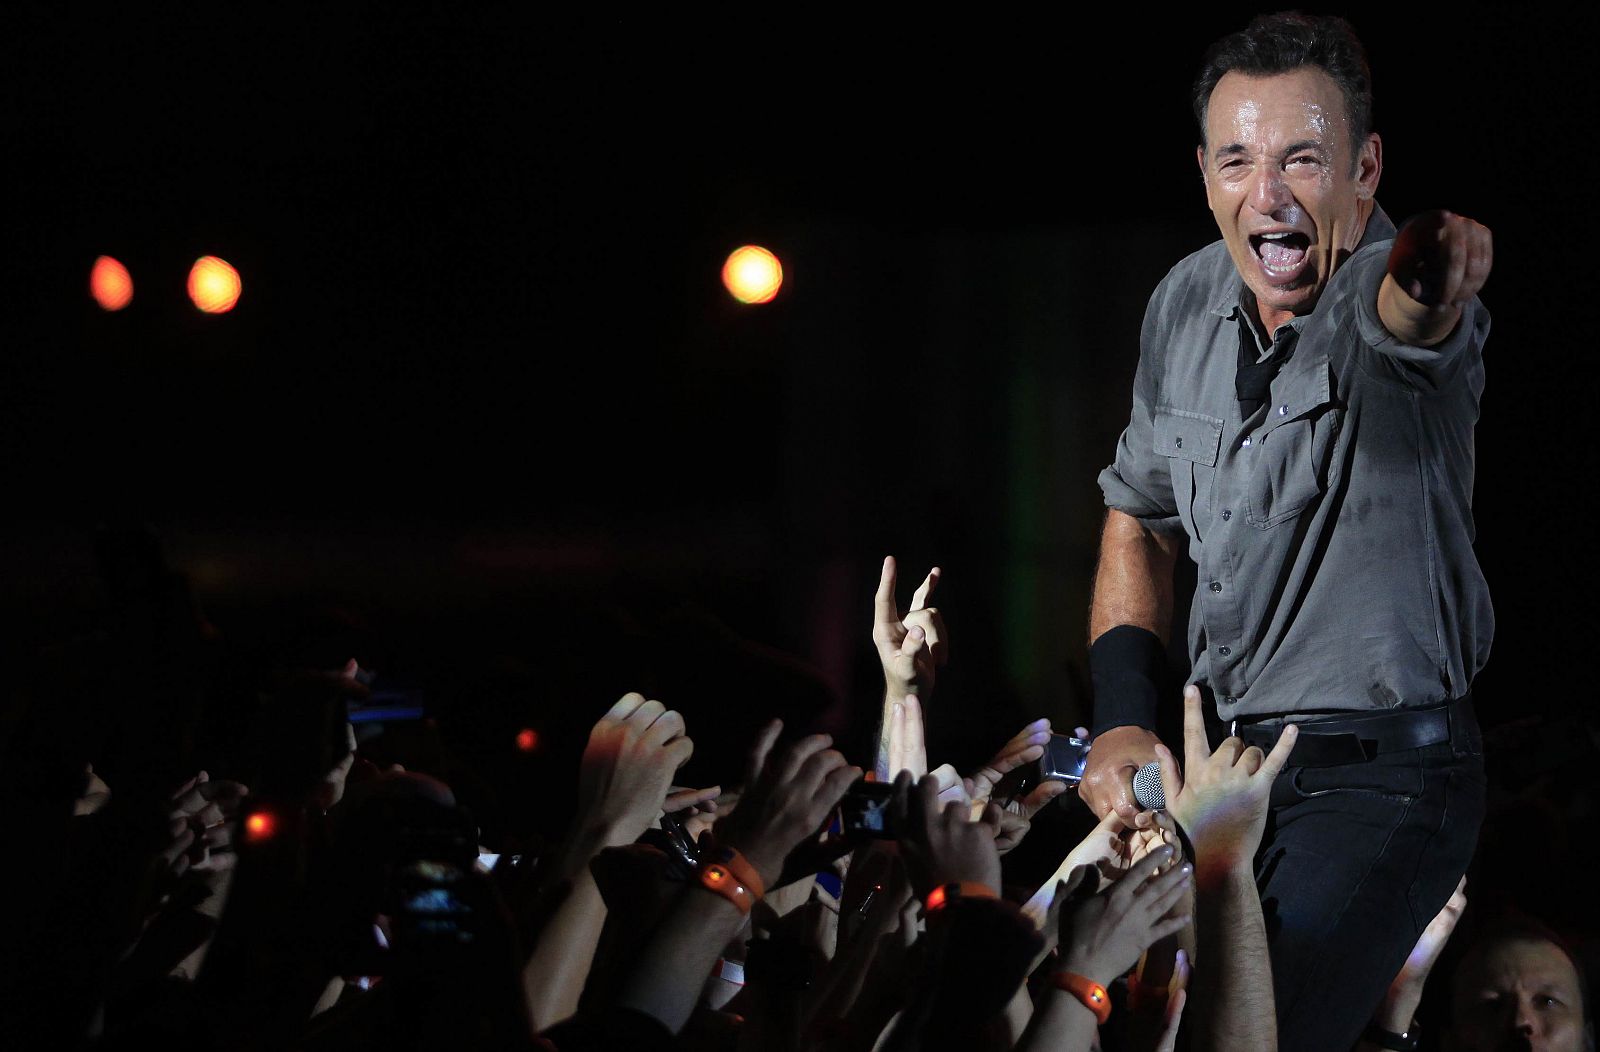 U.S. singer Bruce Springsteen and the Street Band perform at the Rock in Rio Music Festival in Rio de Janeiro